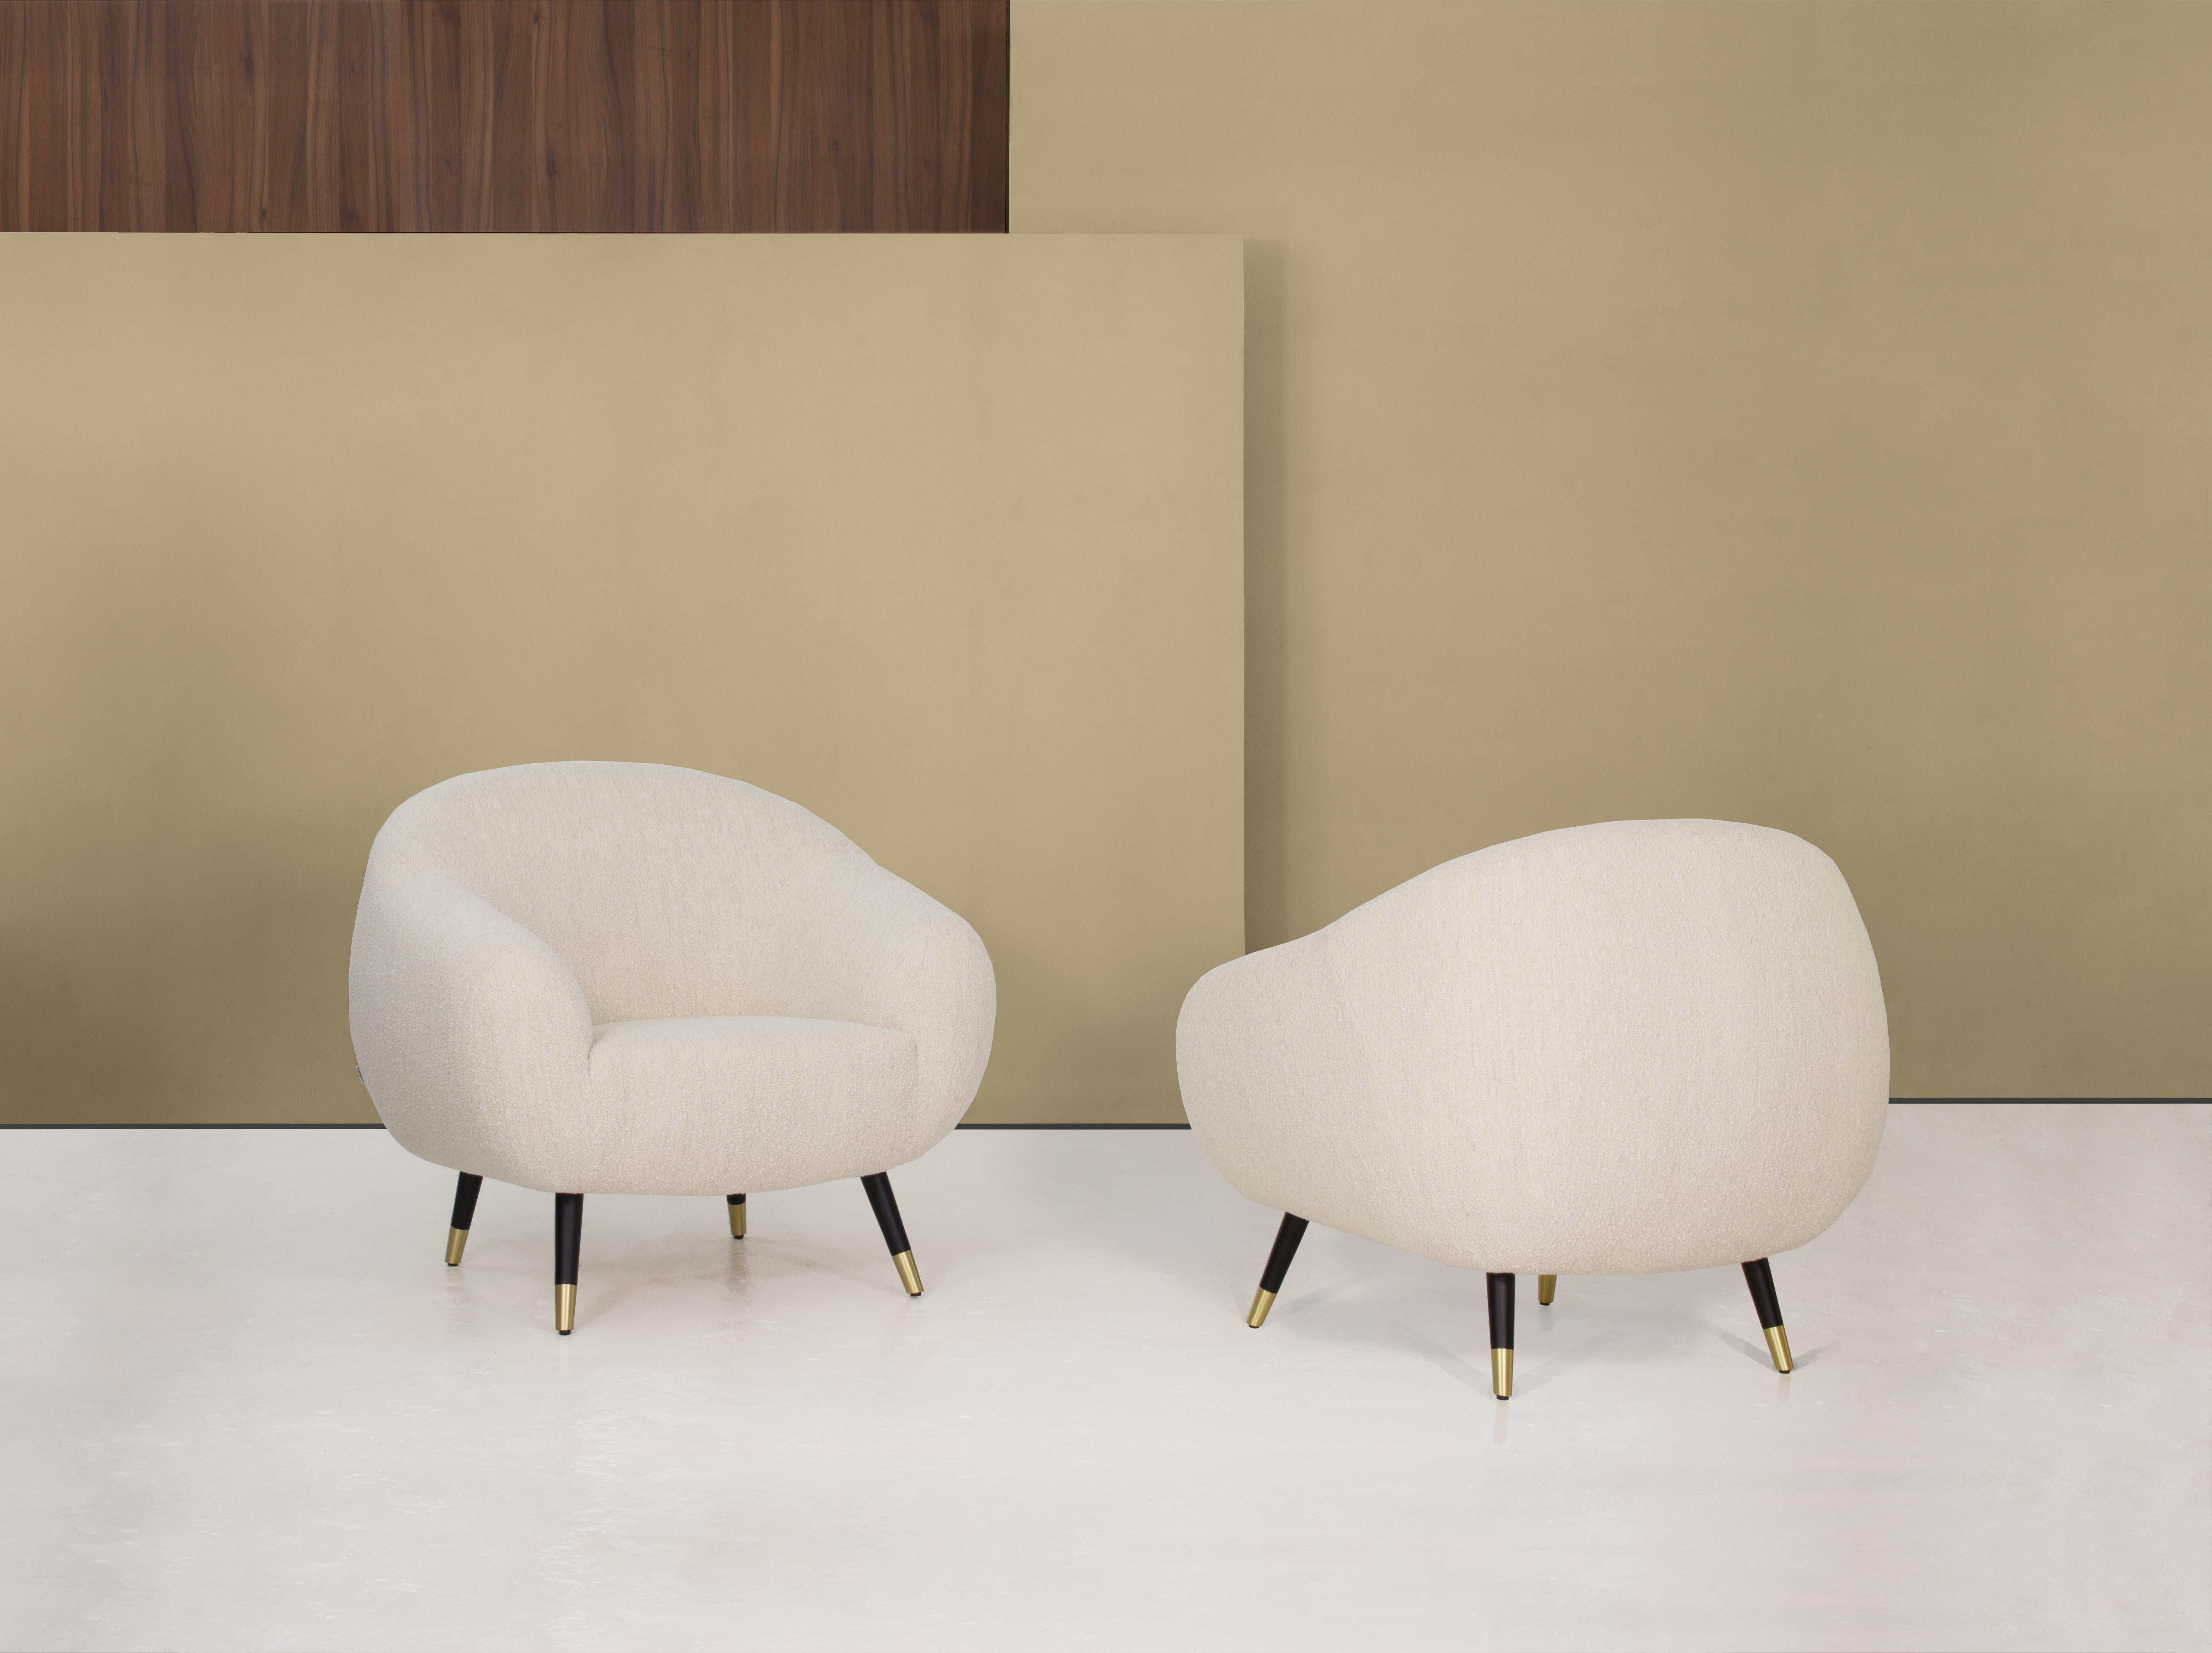 Niemeyer Armchair, Bouclé and Brass, Insidherland by Joana Santos Barbosa In New Condition For Sale In Maia, Porto